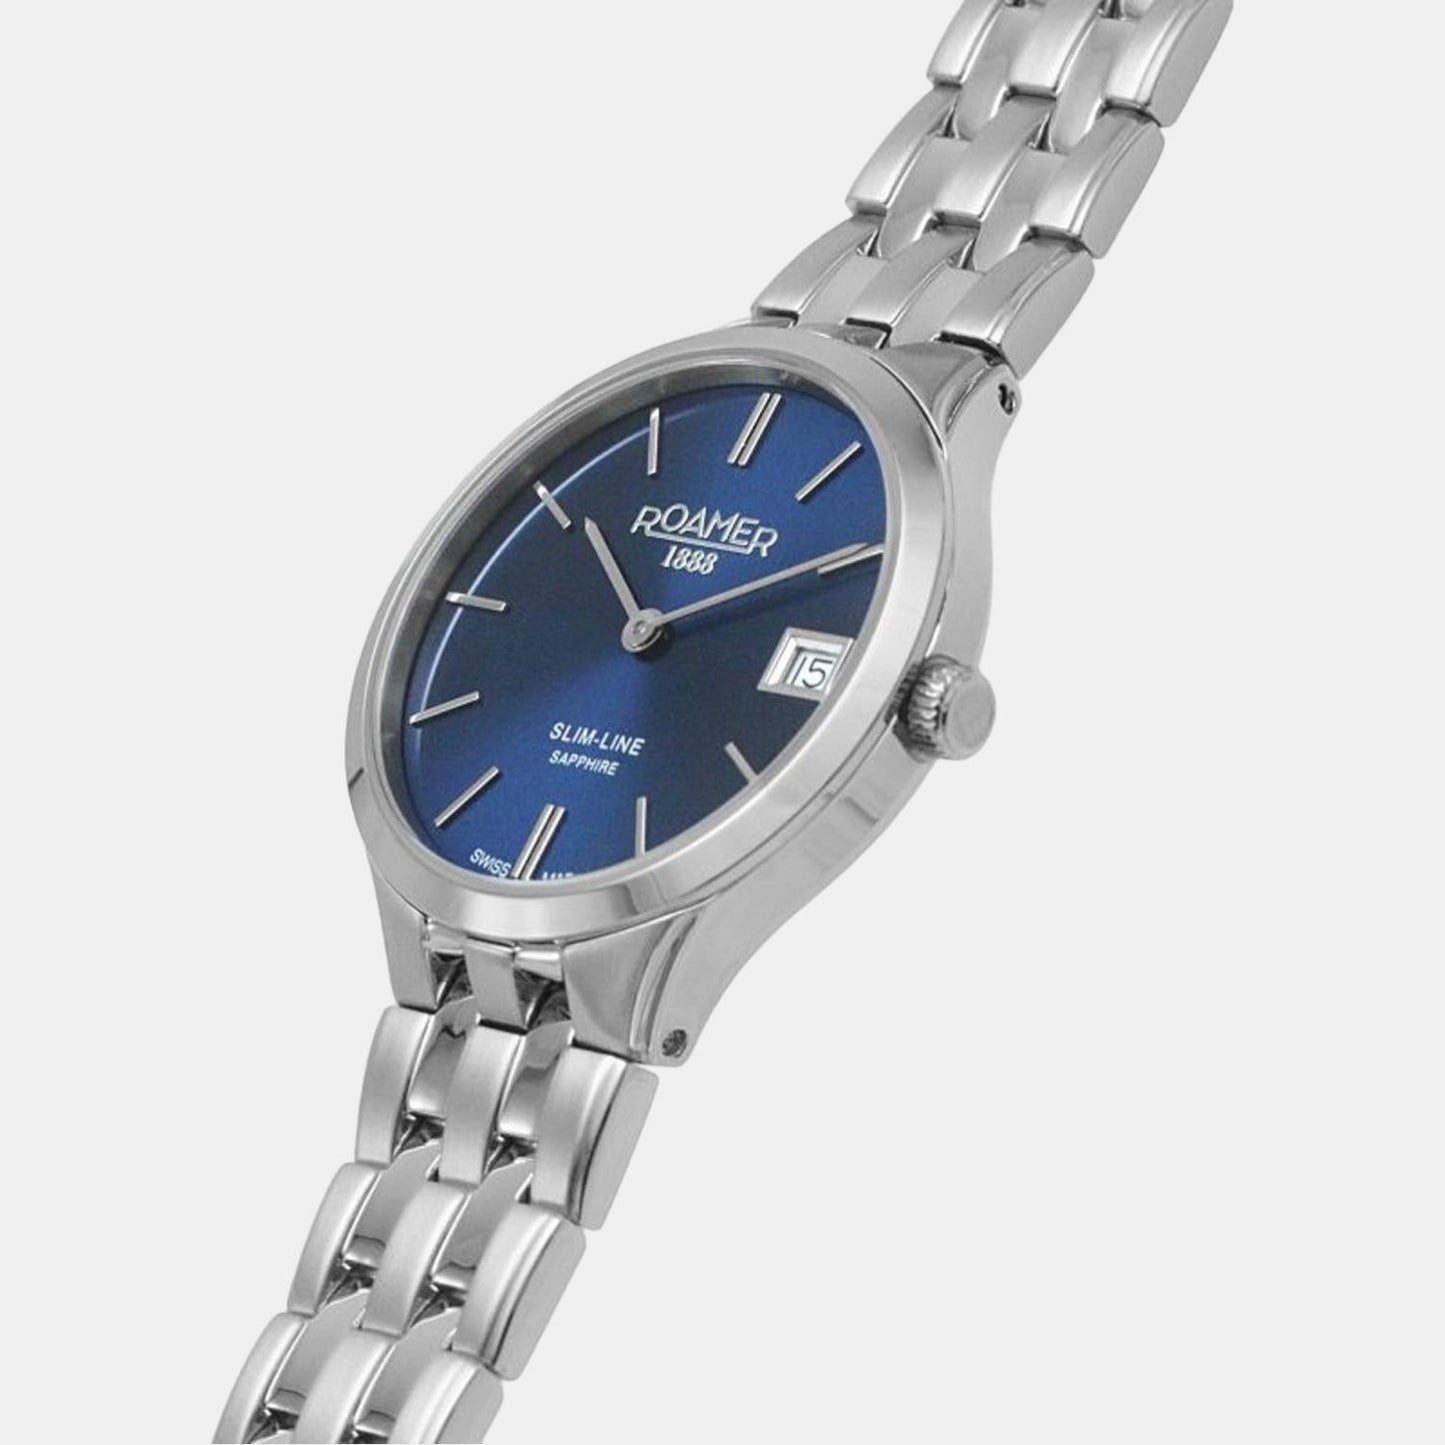 Female Analog Stainless Steel Watch 512857 41 45 20